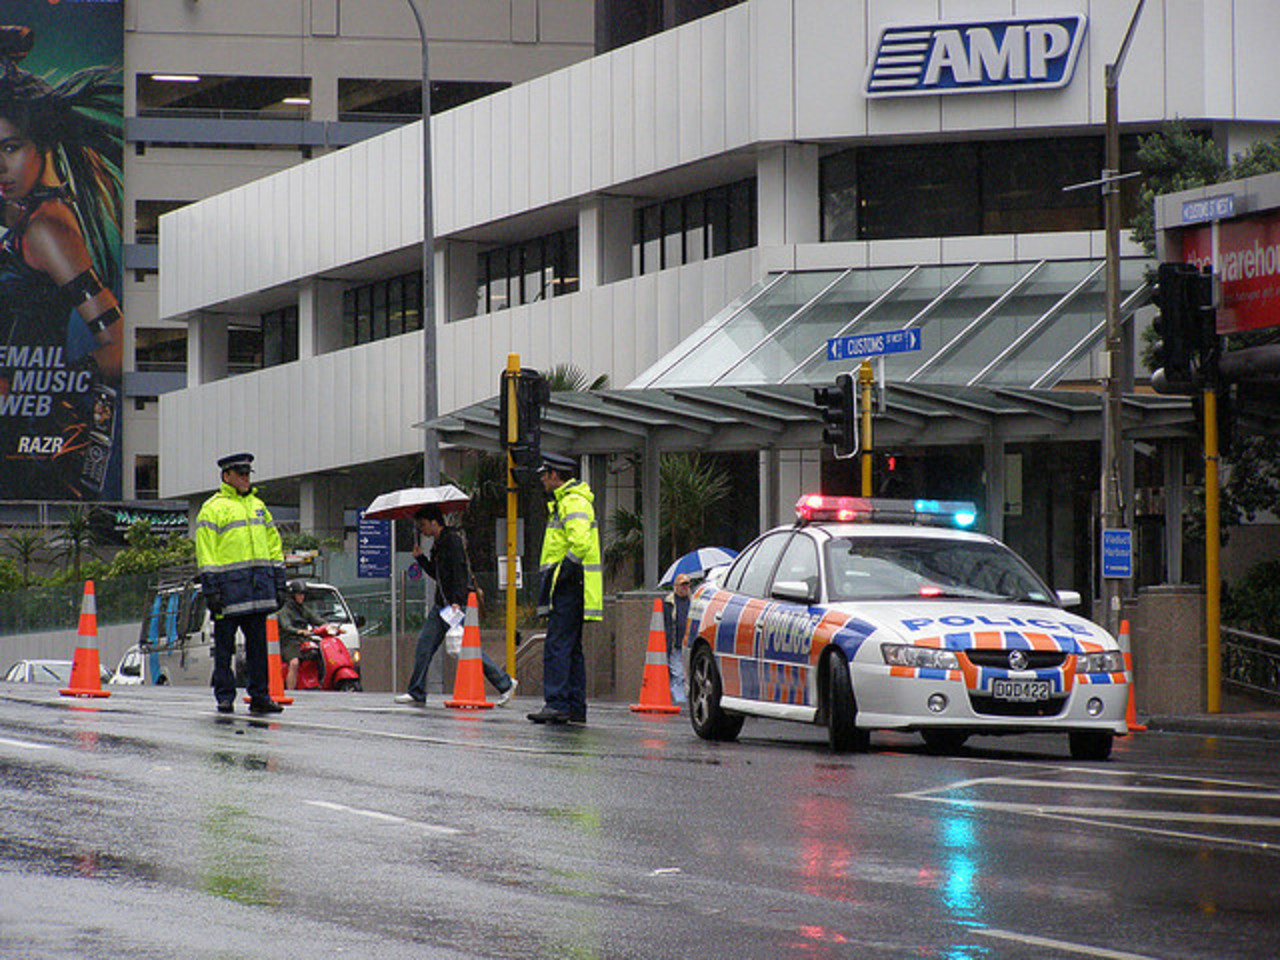 Flickr: The Nz Police Pool